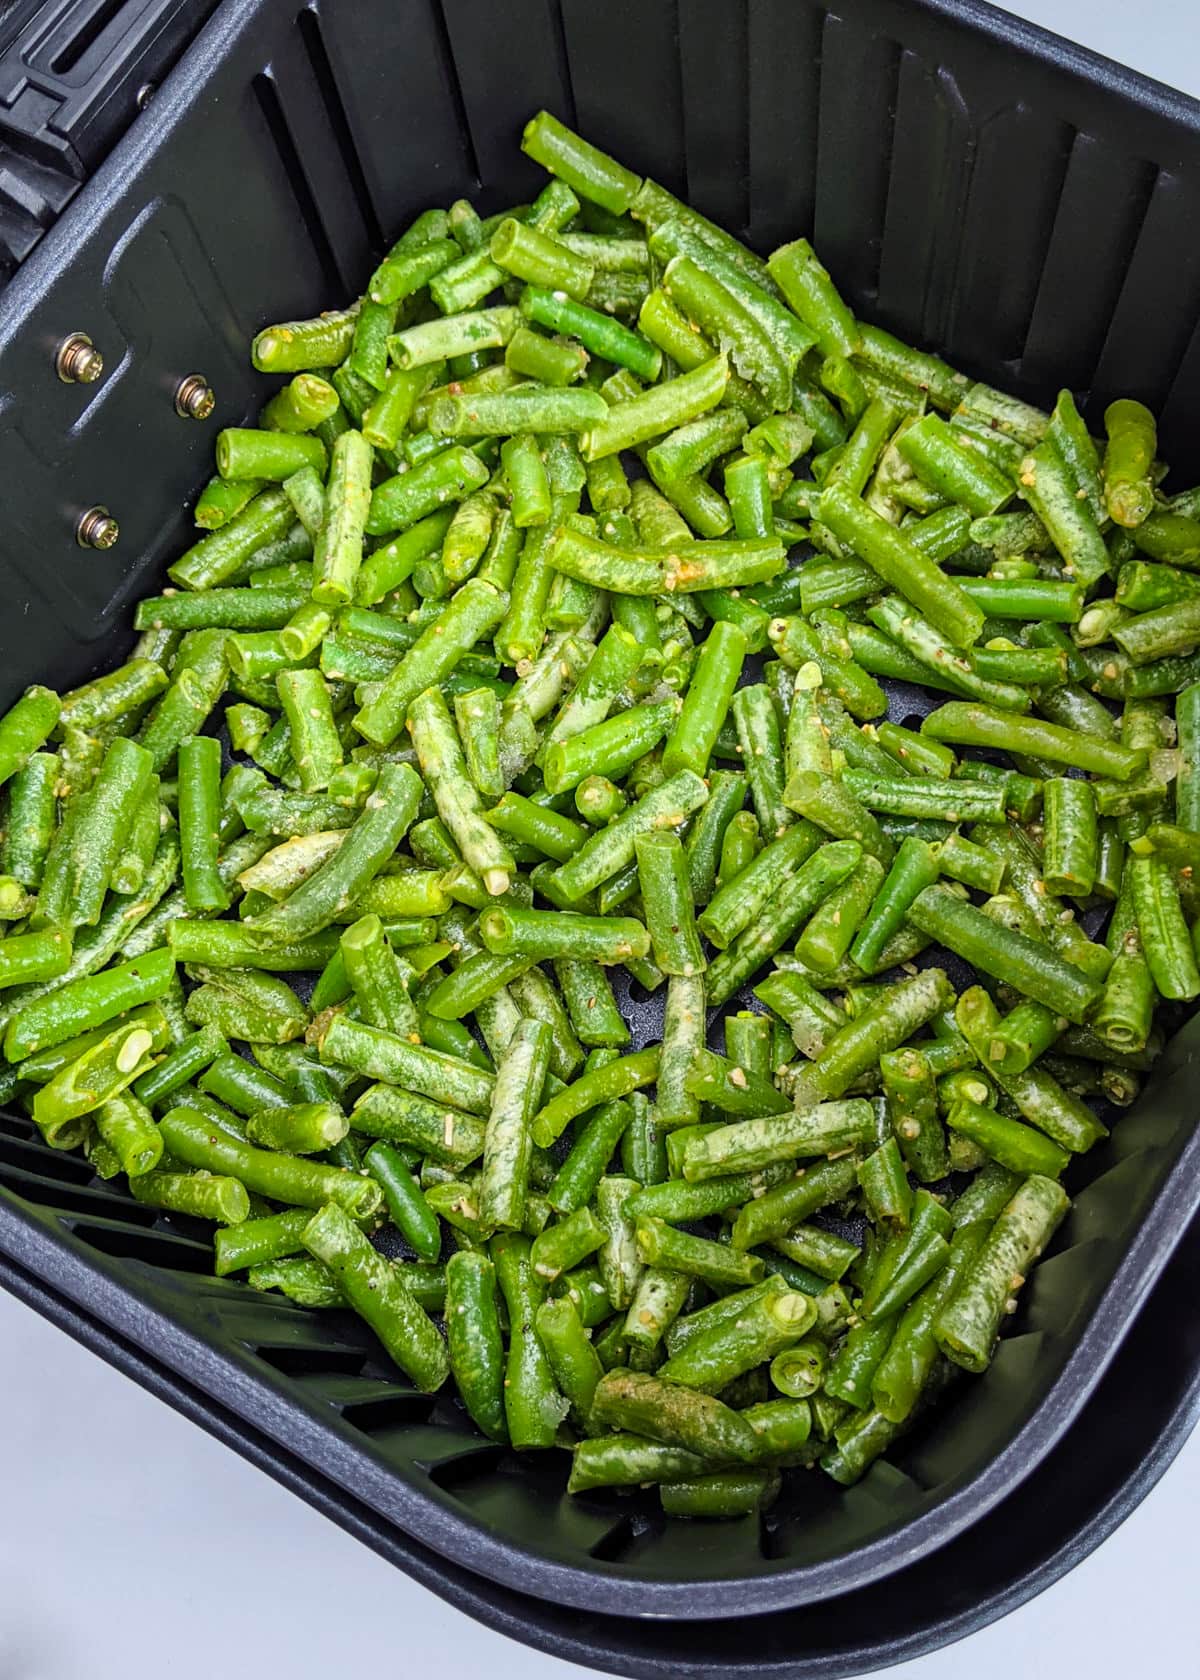 Top view of frozen green beans in the air fryer basket.